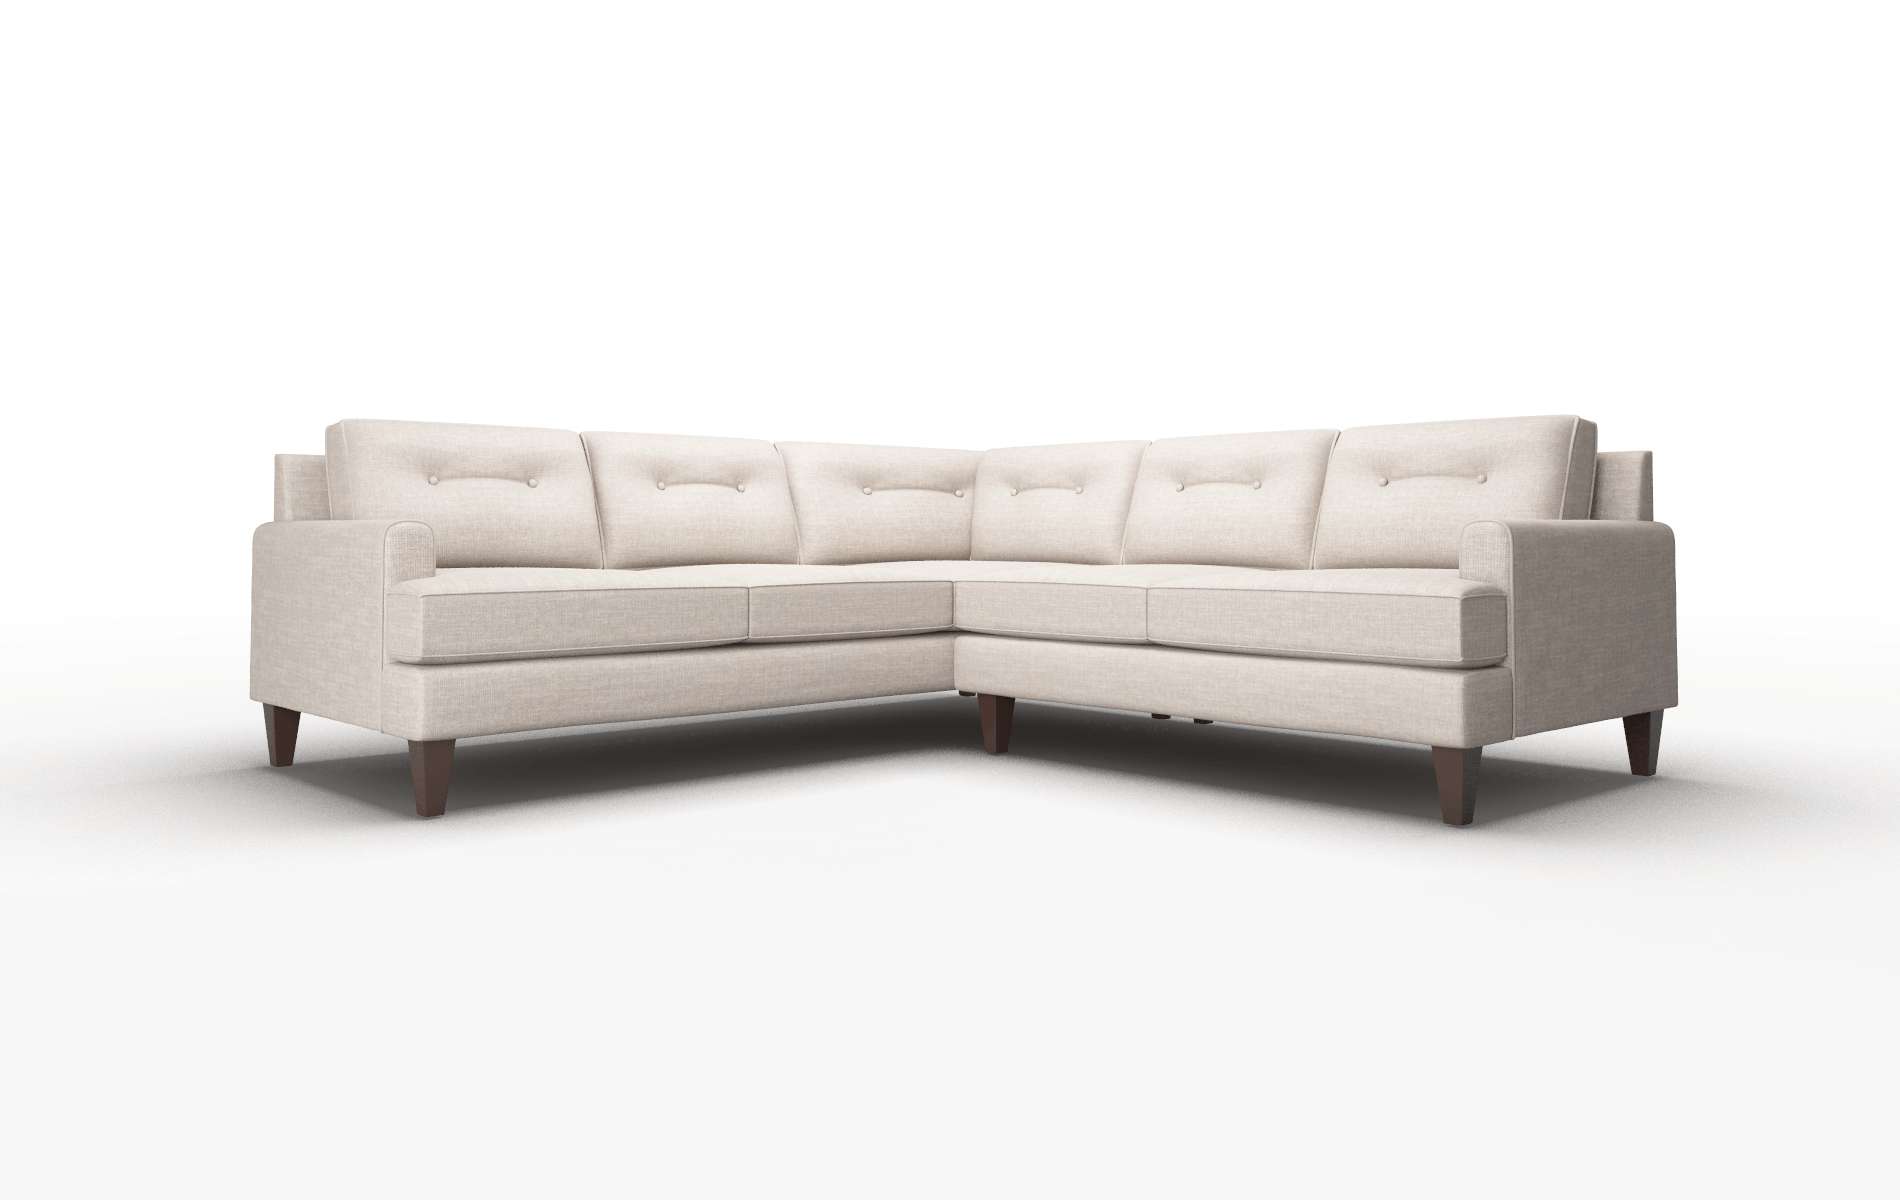 Naples Clyde Dolphin Sectional espresso legs 1